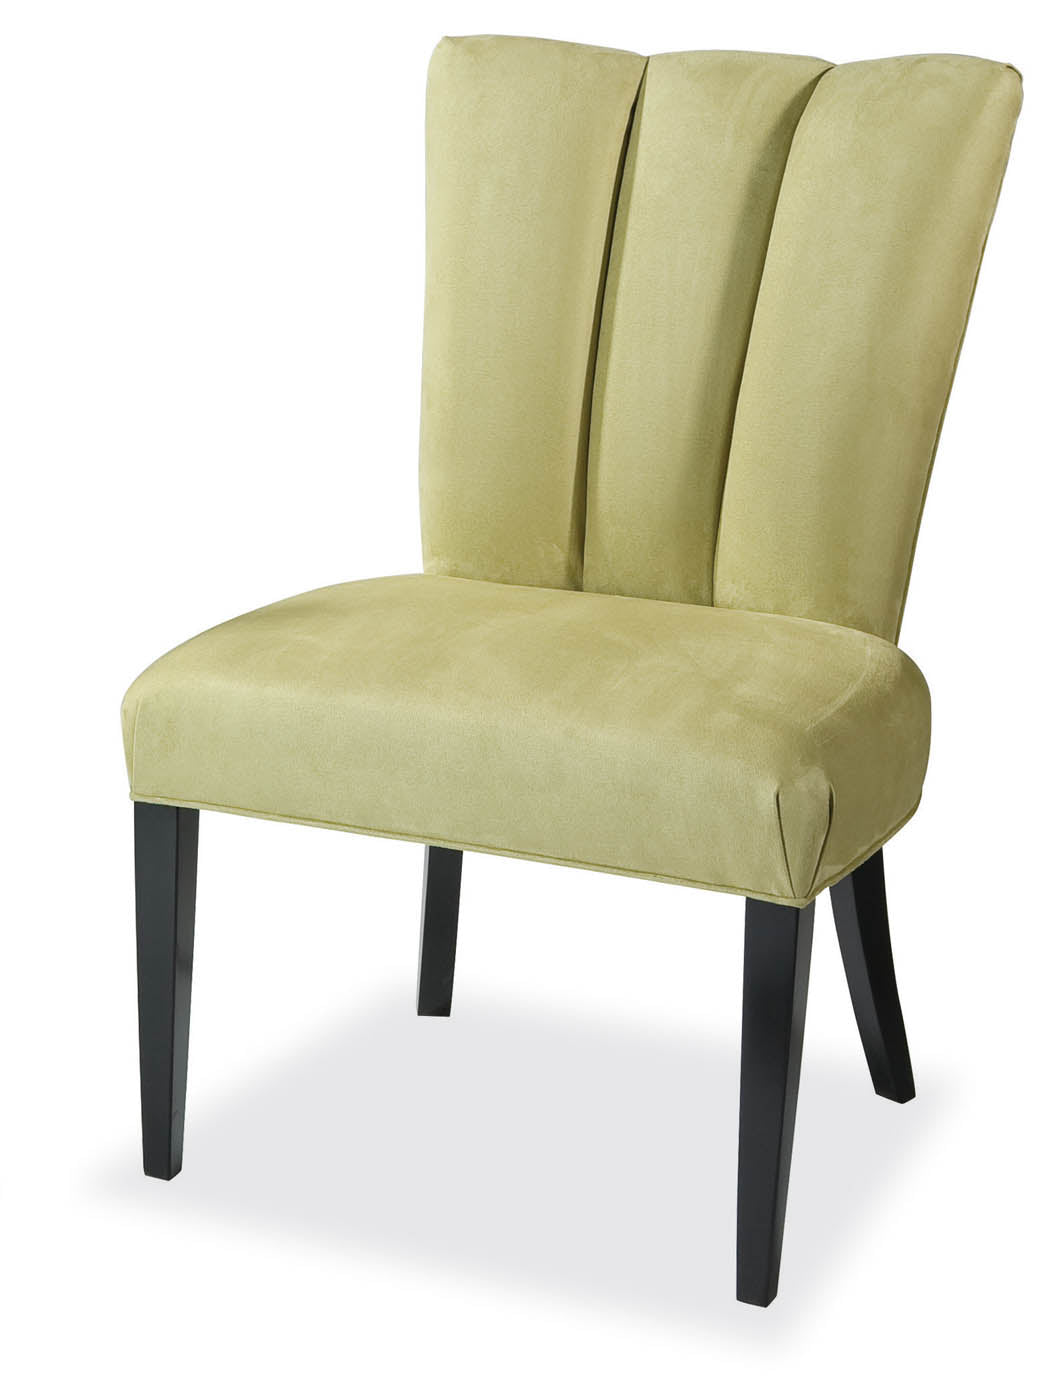 Channel Back Dining Chair